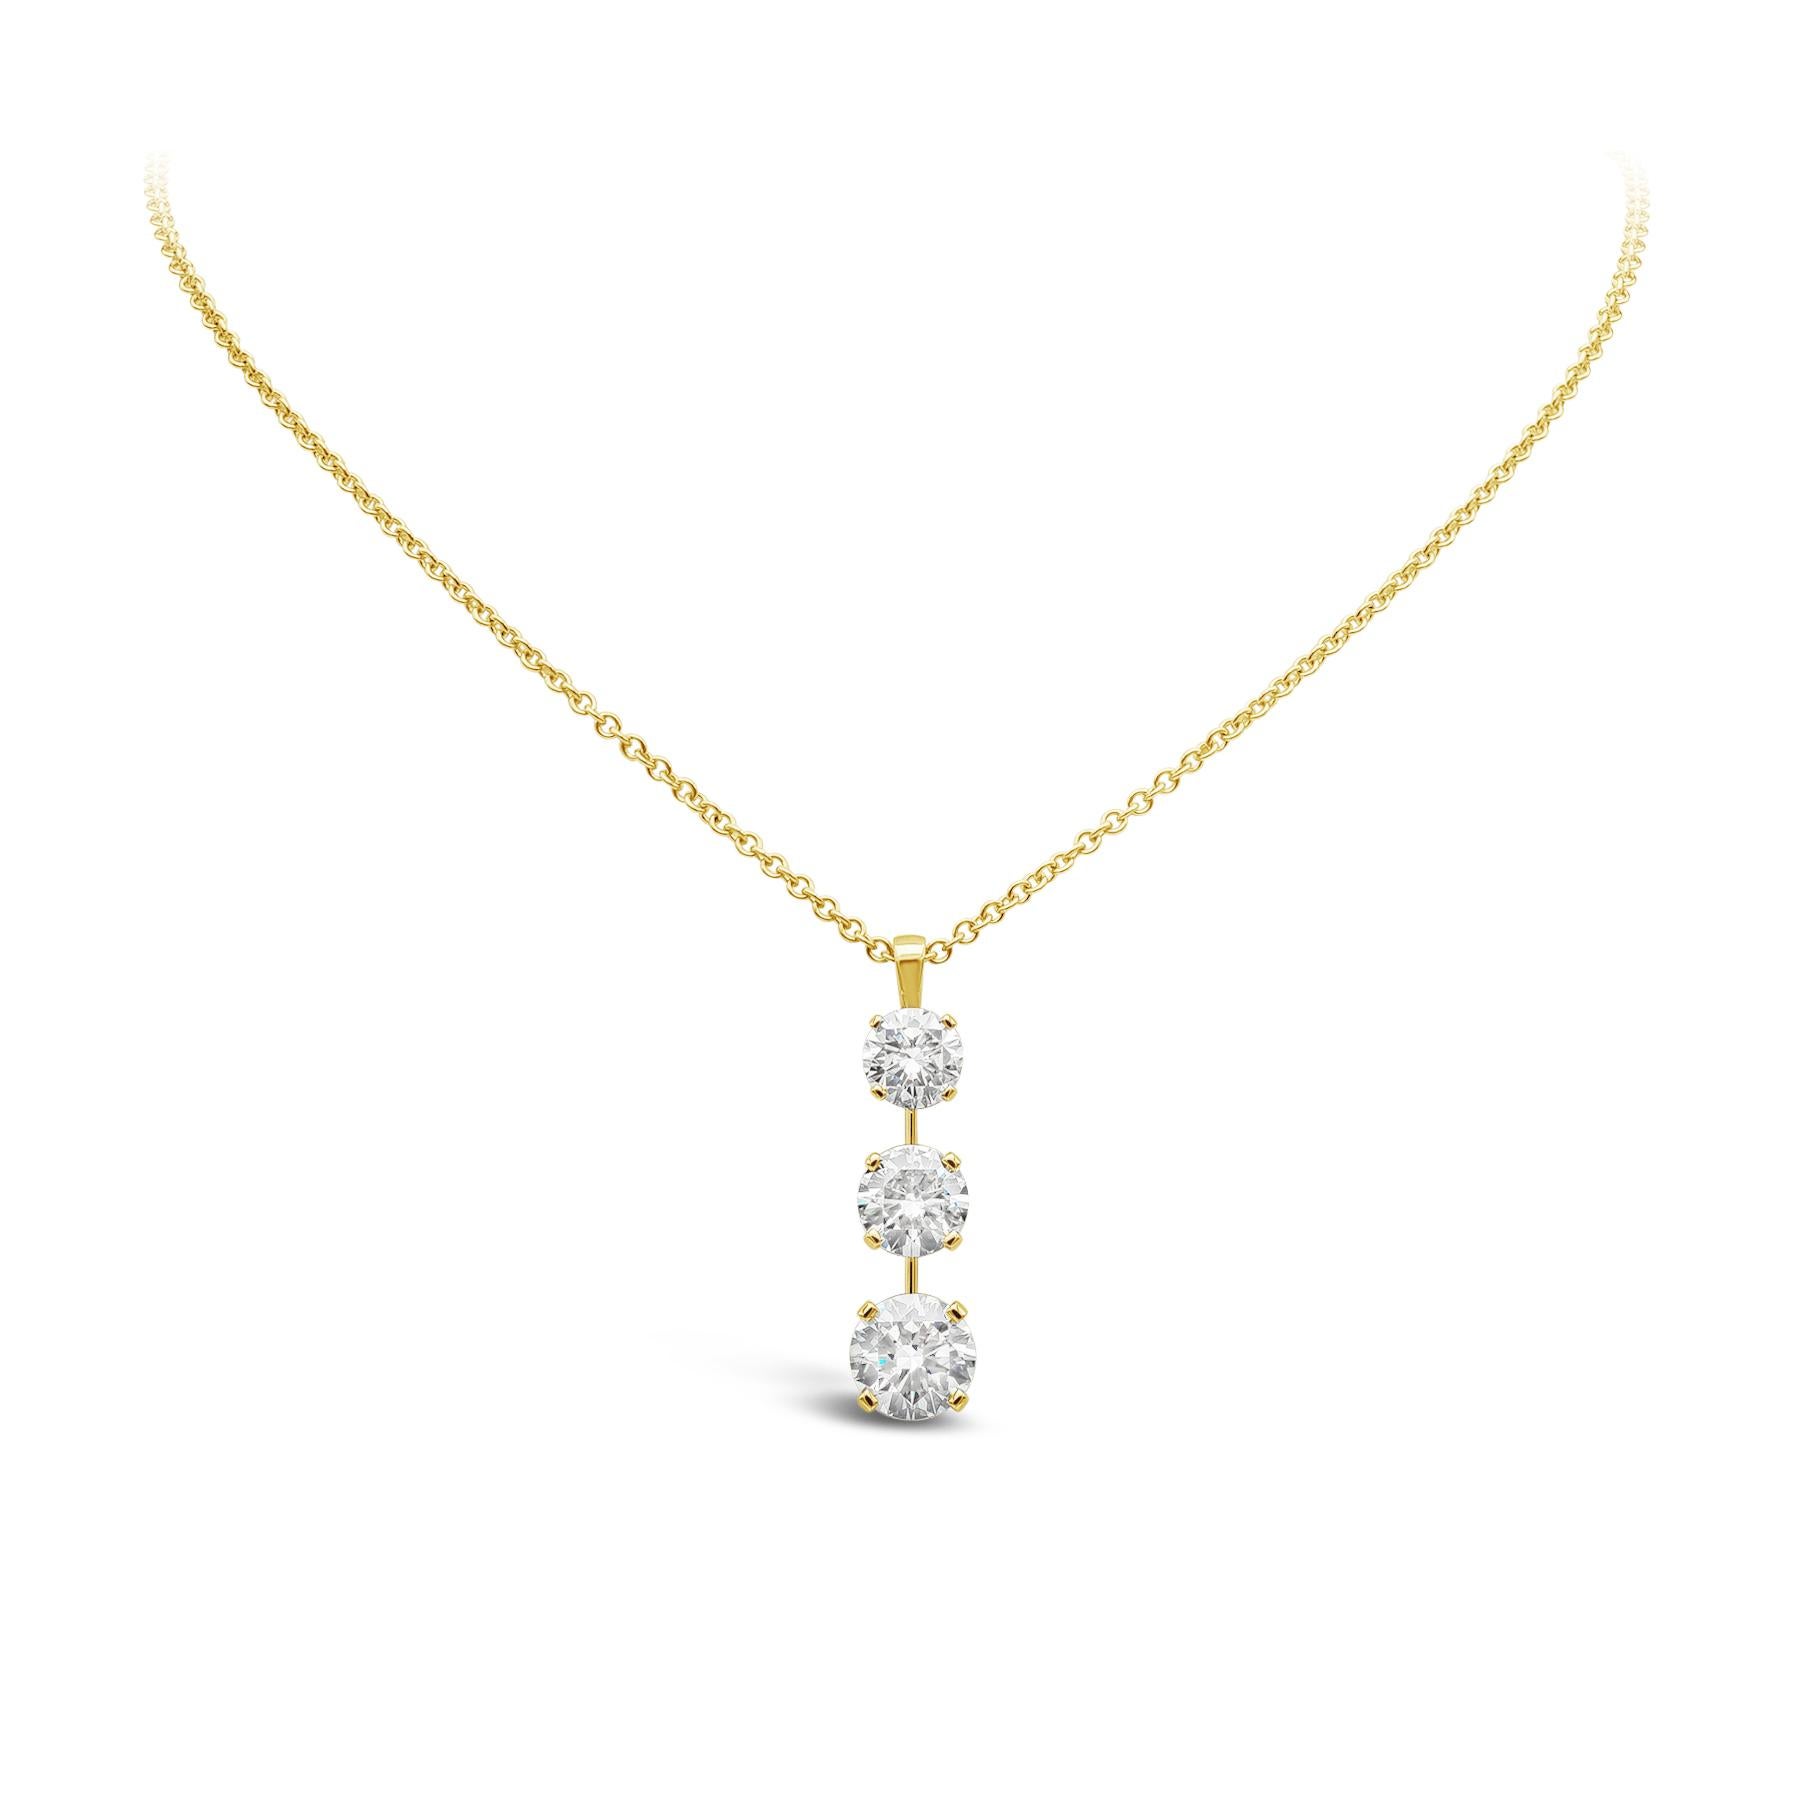 A beautiful drop necklace style, showcasing three round brilliant cut diamonds graduating in size, set in a polished 18K yellow gold mounting. The first diamond weighs 1.74 carats and certified by GIA as O-P color and SI2 clarity. The second and